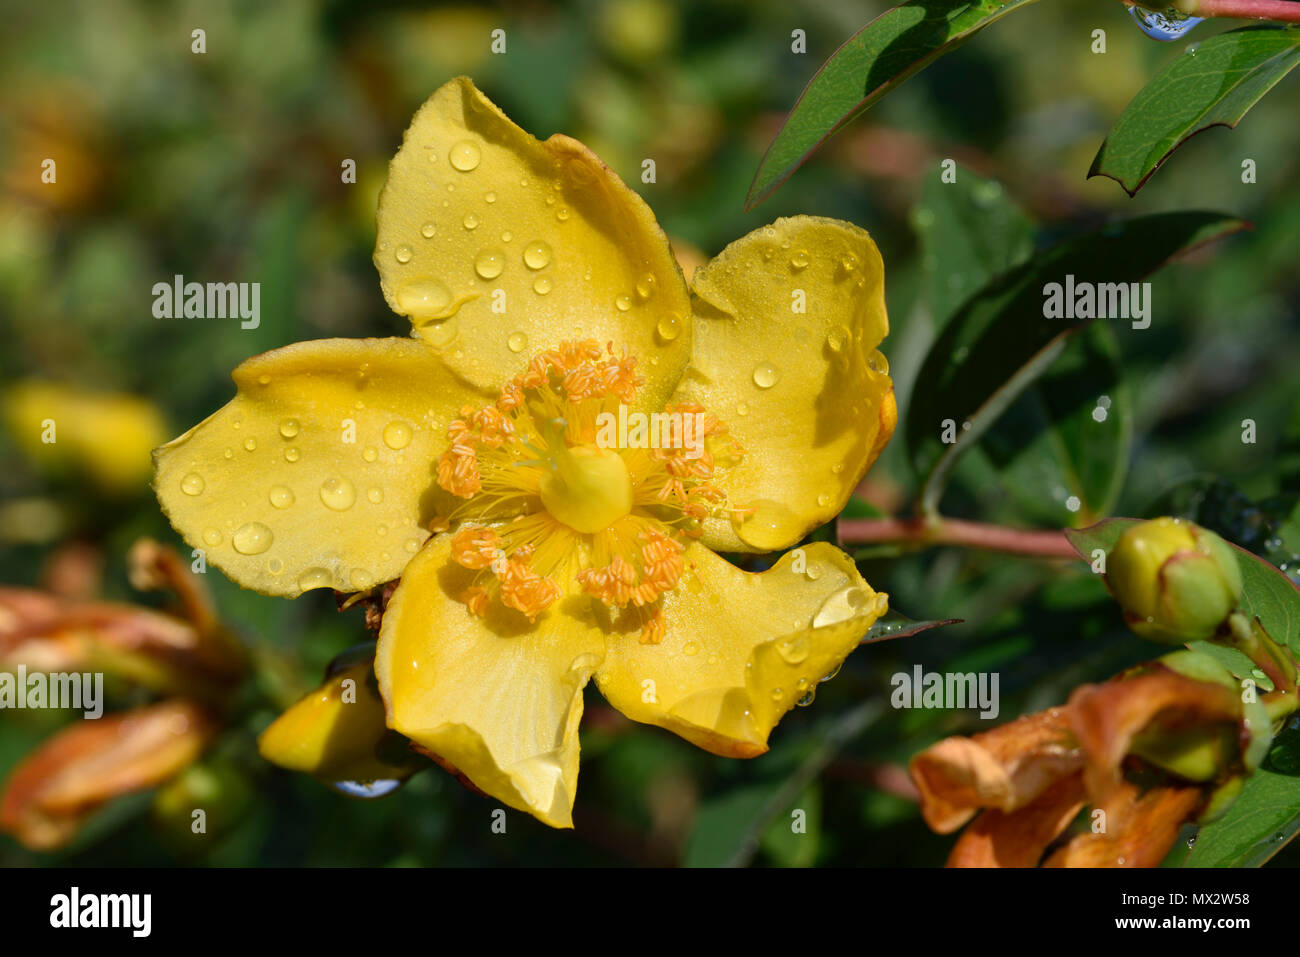 Autumn Buttercup with dewdrops Stock Photo